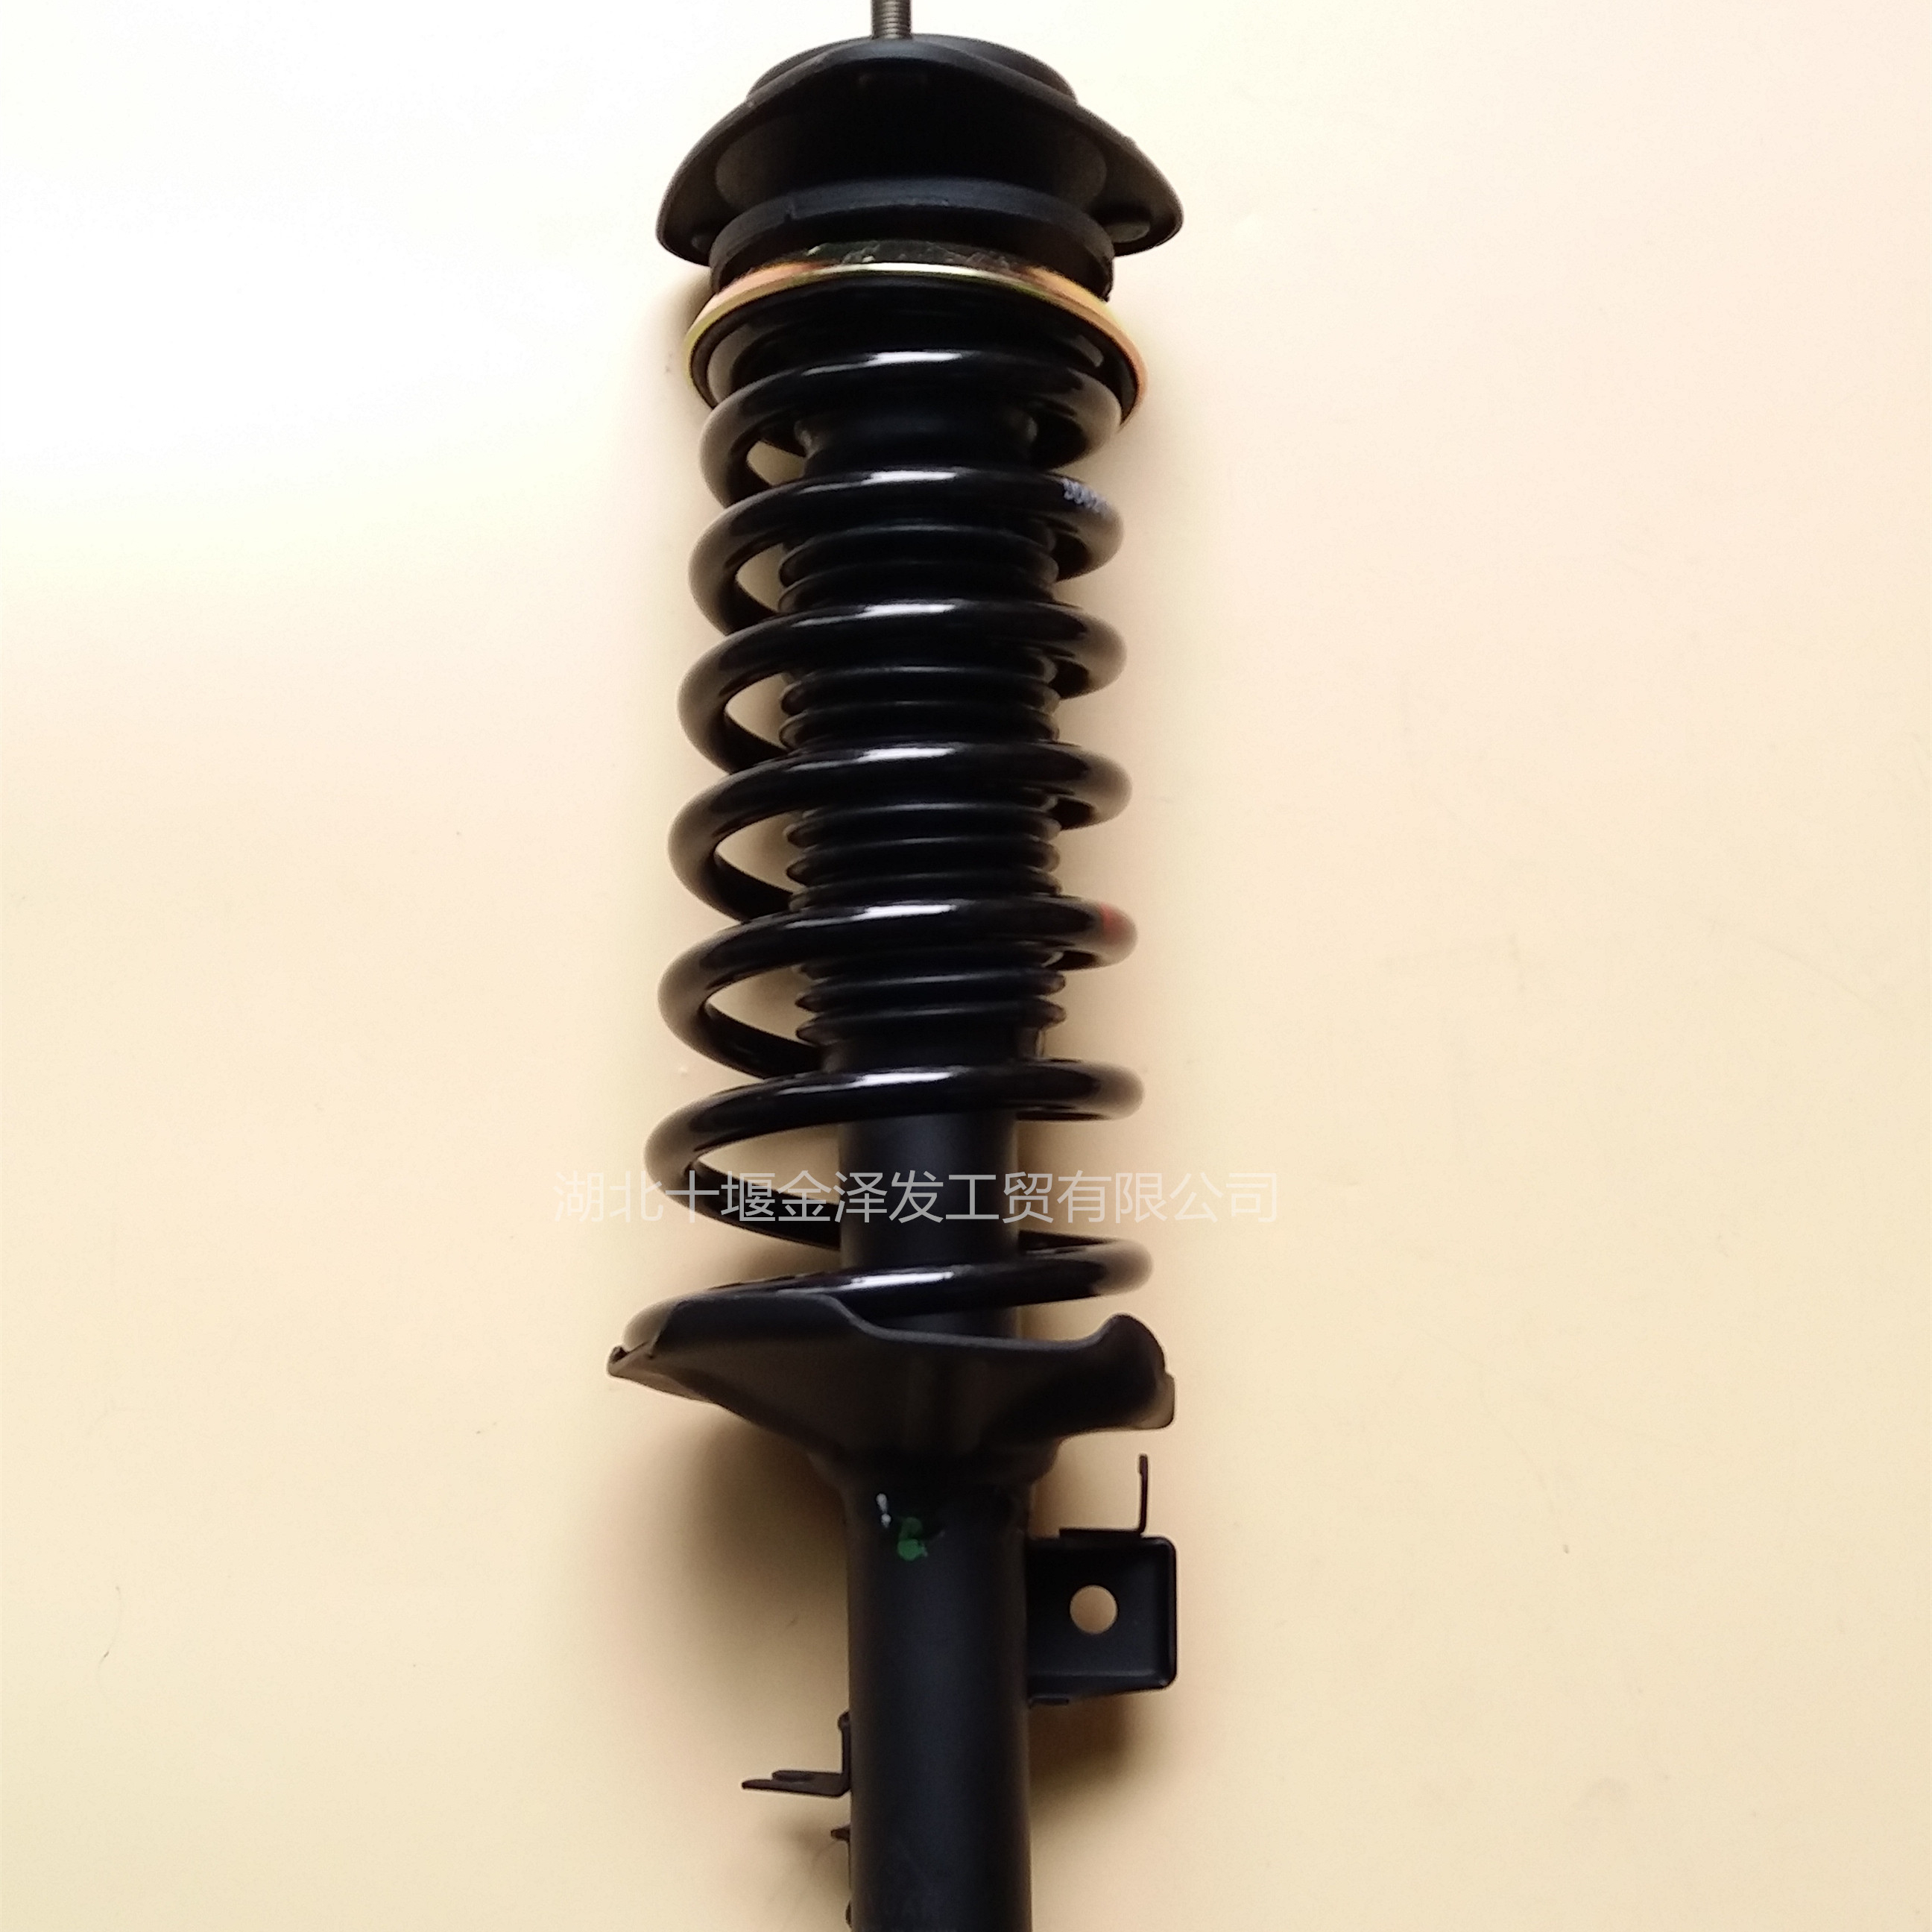 Hot sale dongfeng Glory fengguang 330 car shock absorber L/R 